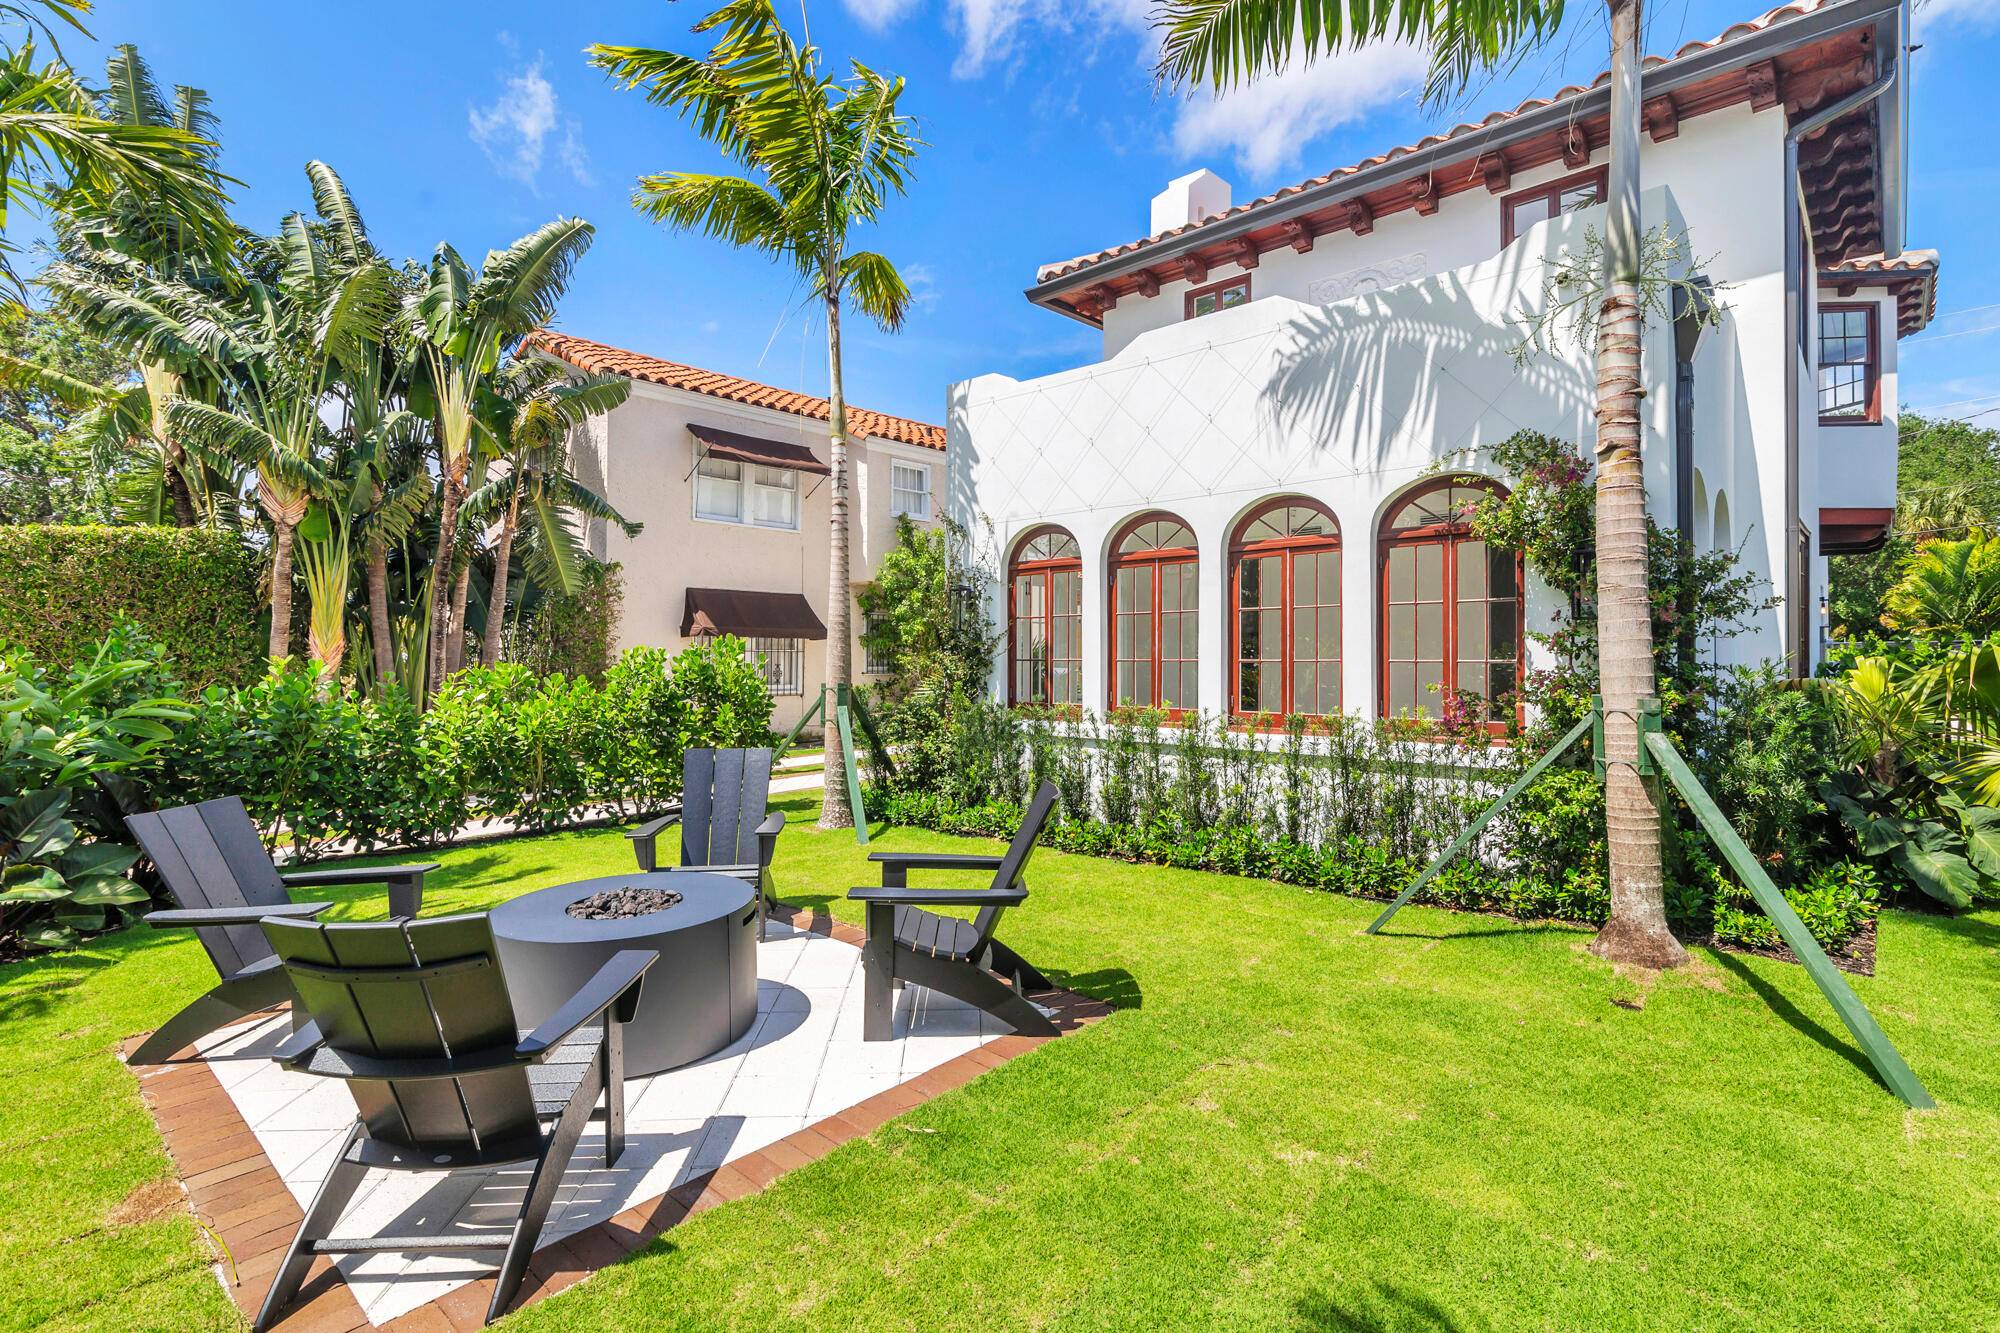 Welcome to Historic El Cid, one of the most sought after neighborhoods in West Palm Beach.